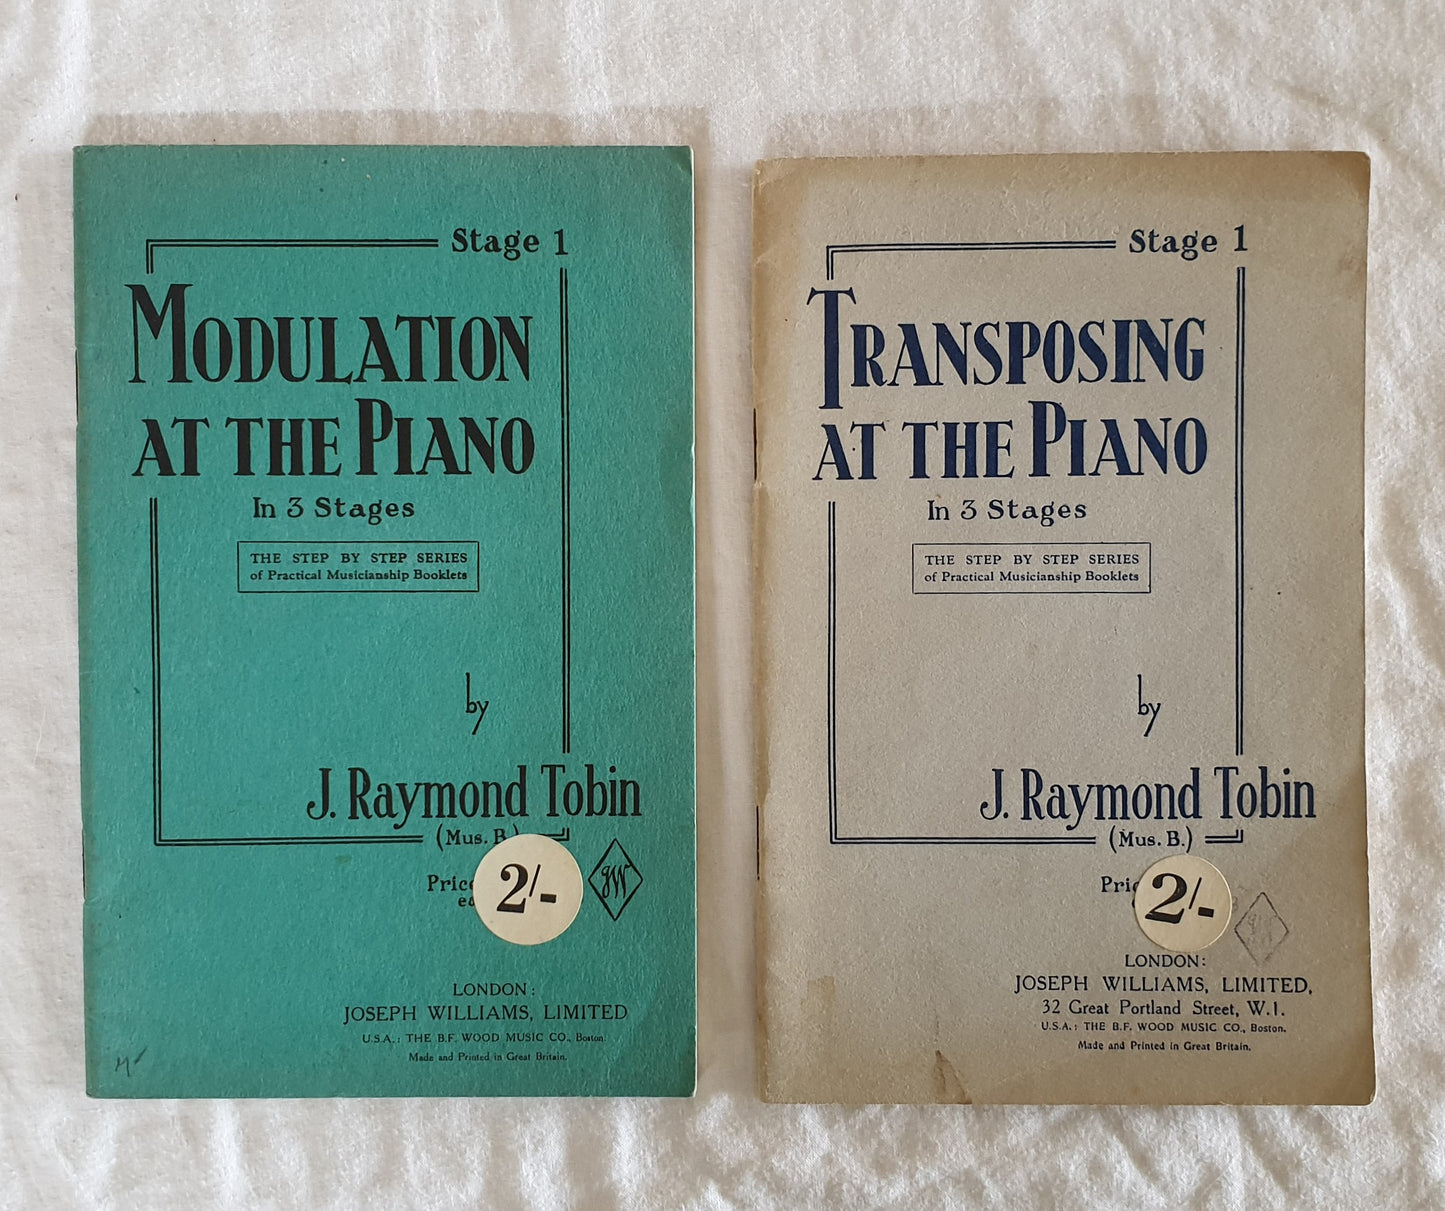 Transposing at the Piano in 3 Stages by J. Raymond Tobin